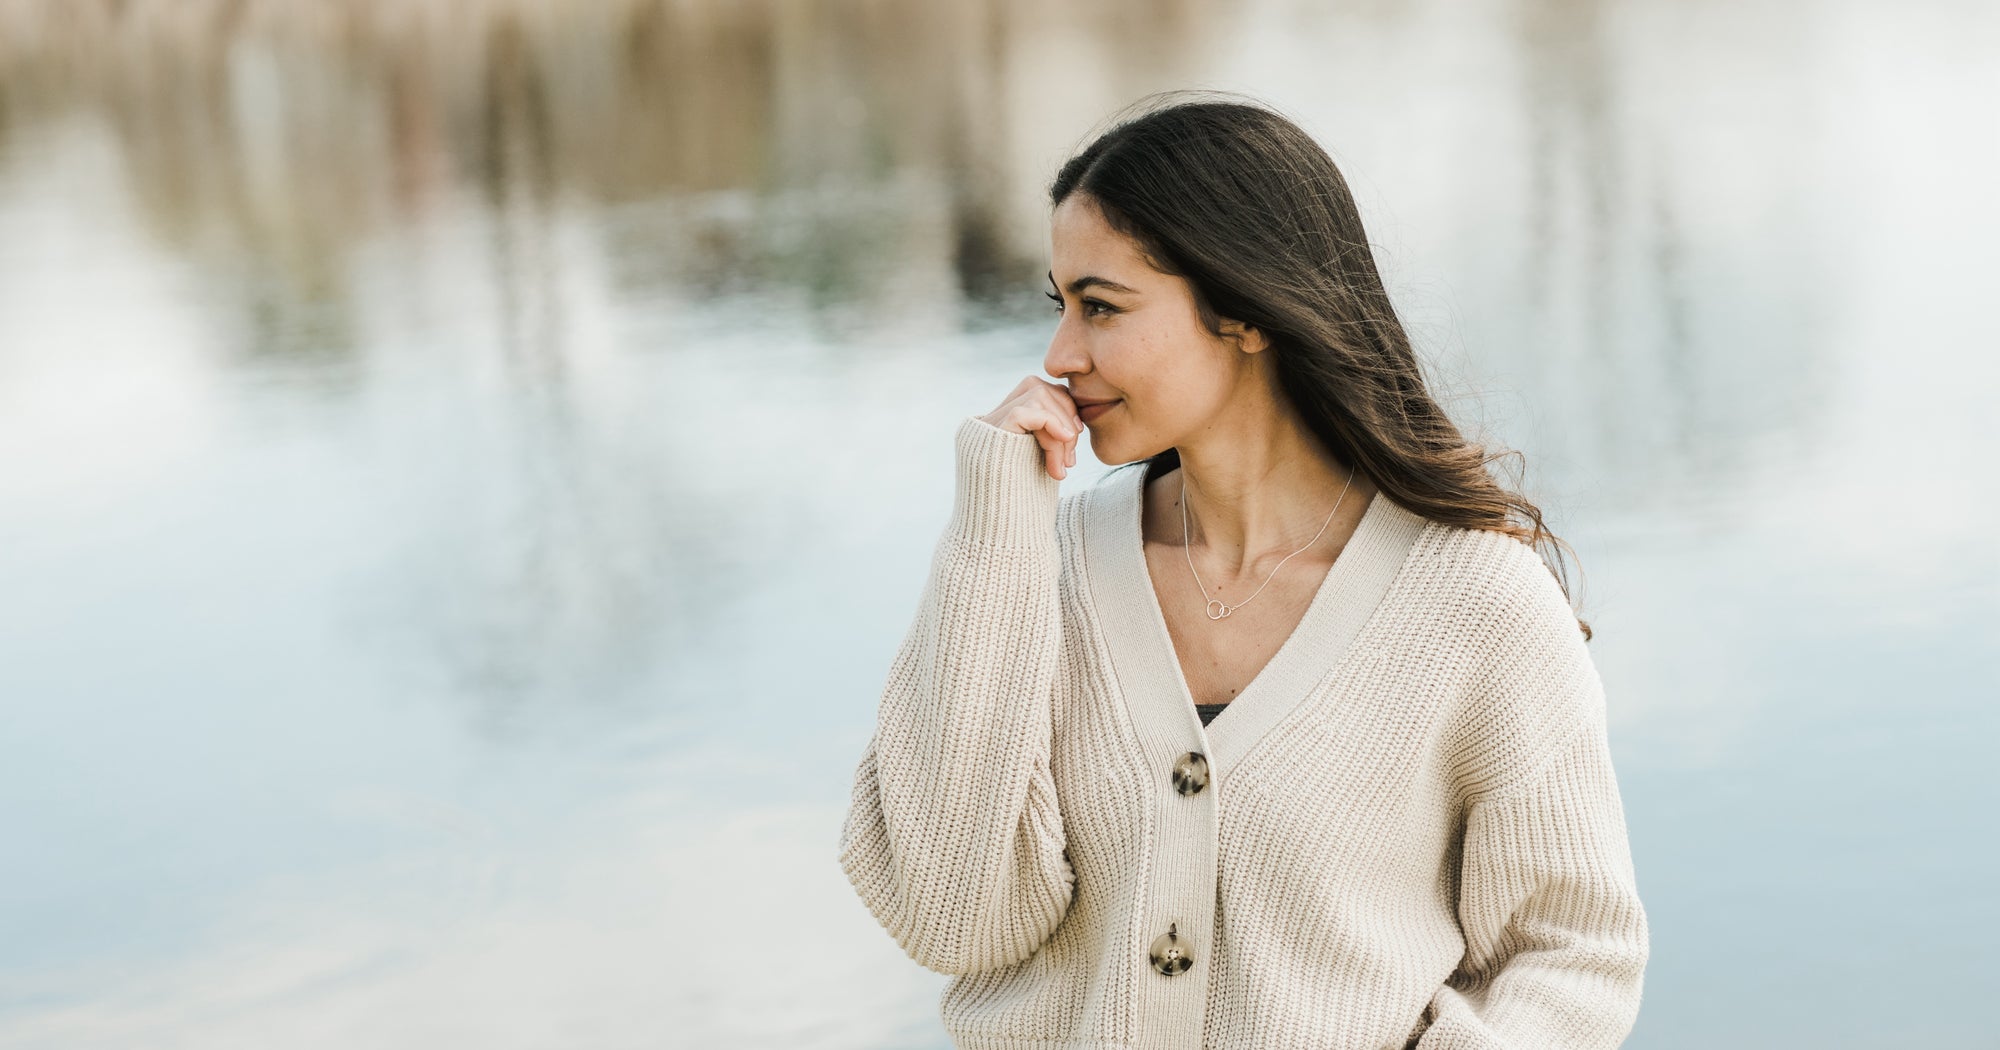 Woman in a beige sweater standing thoughtfully beside a body of water.